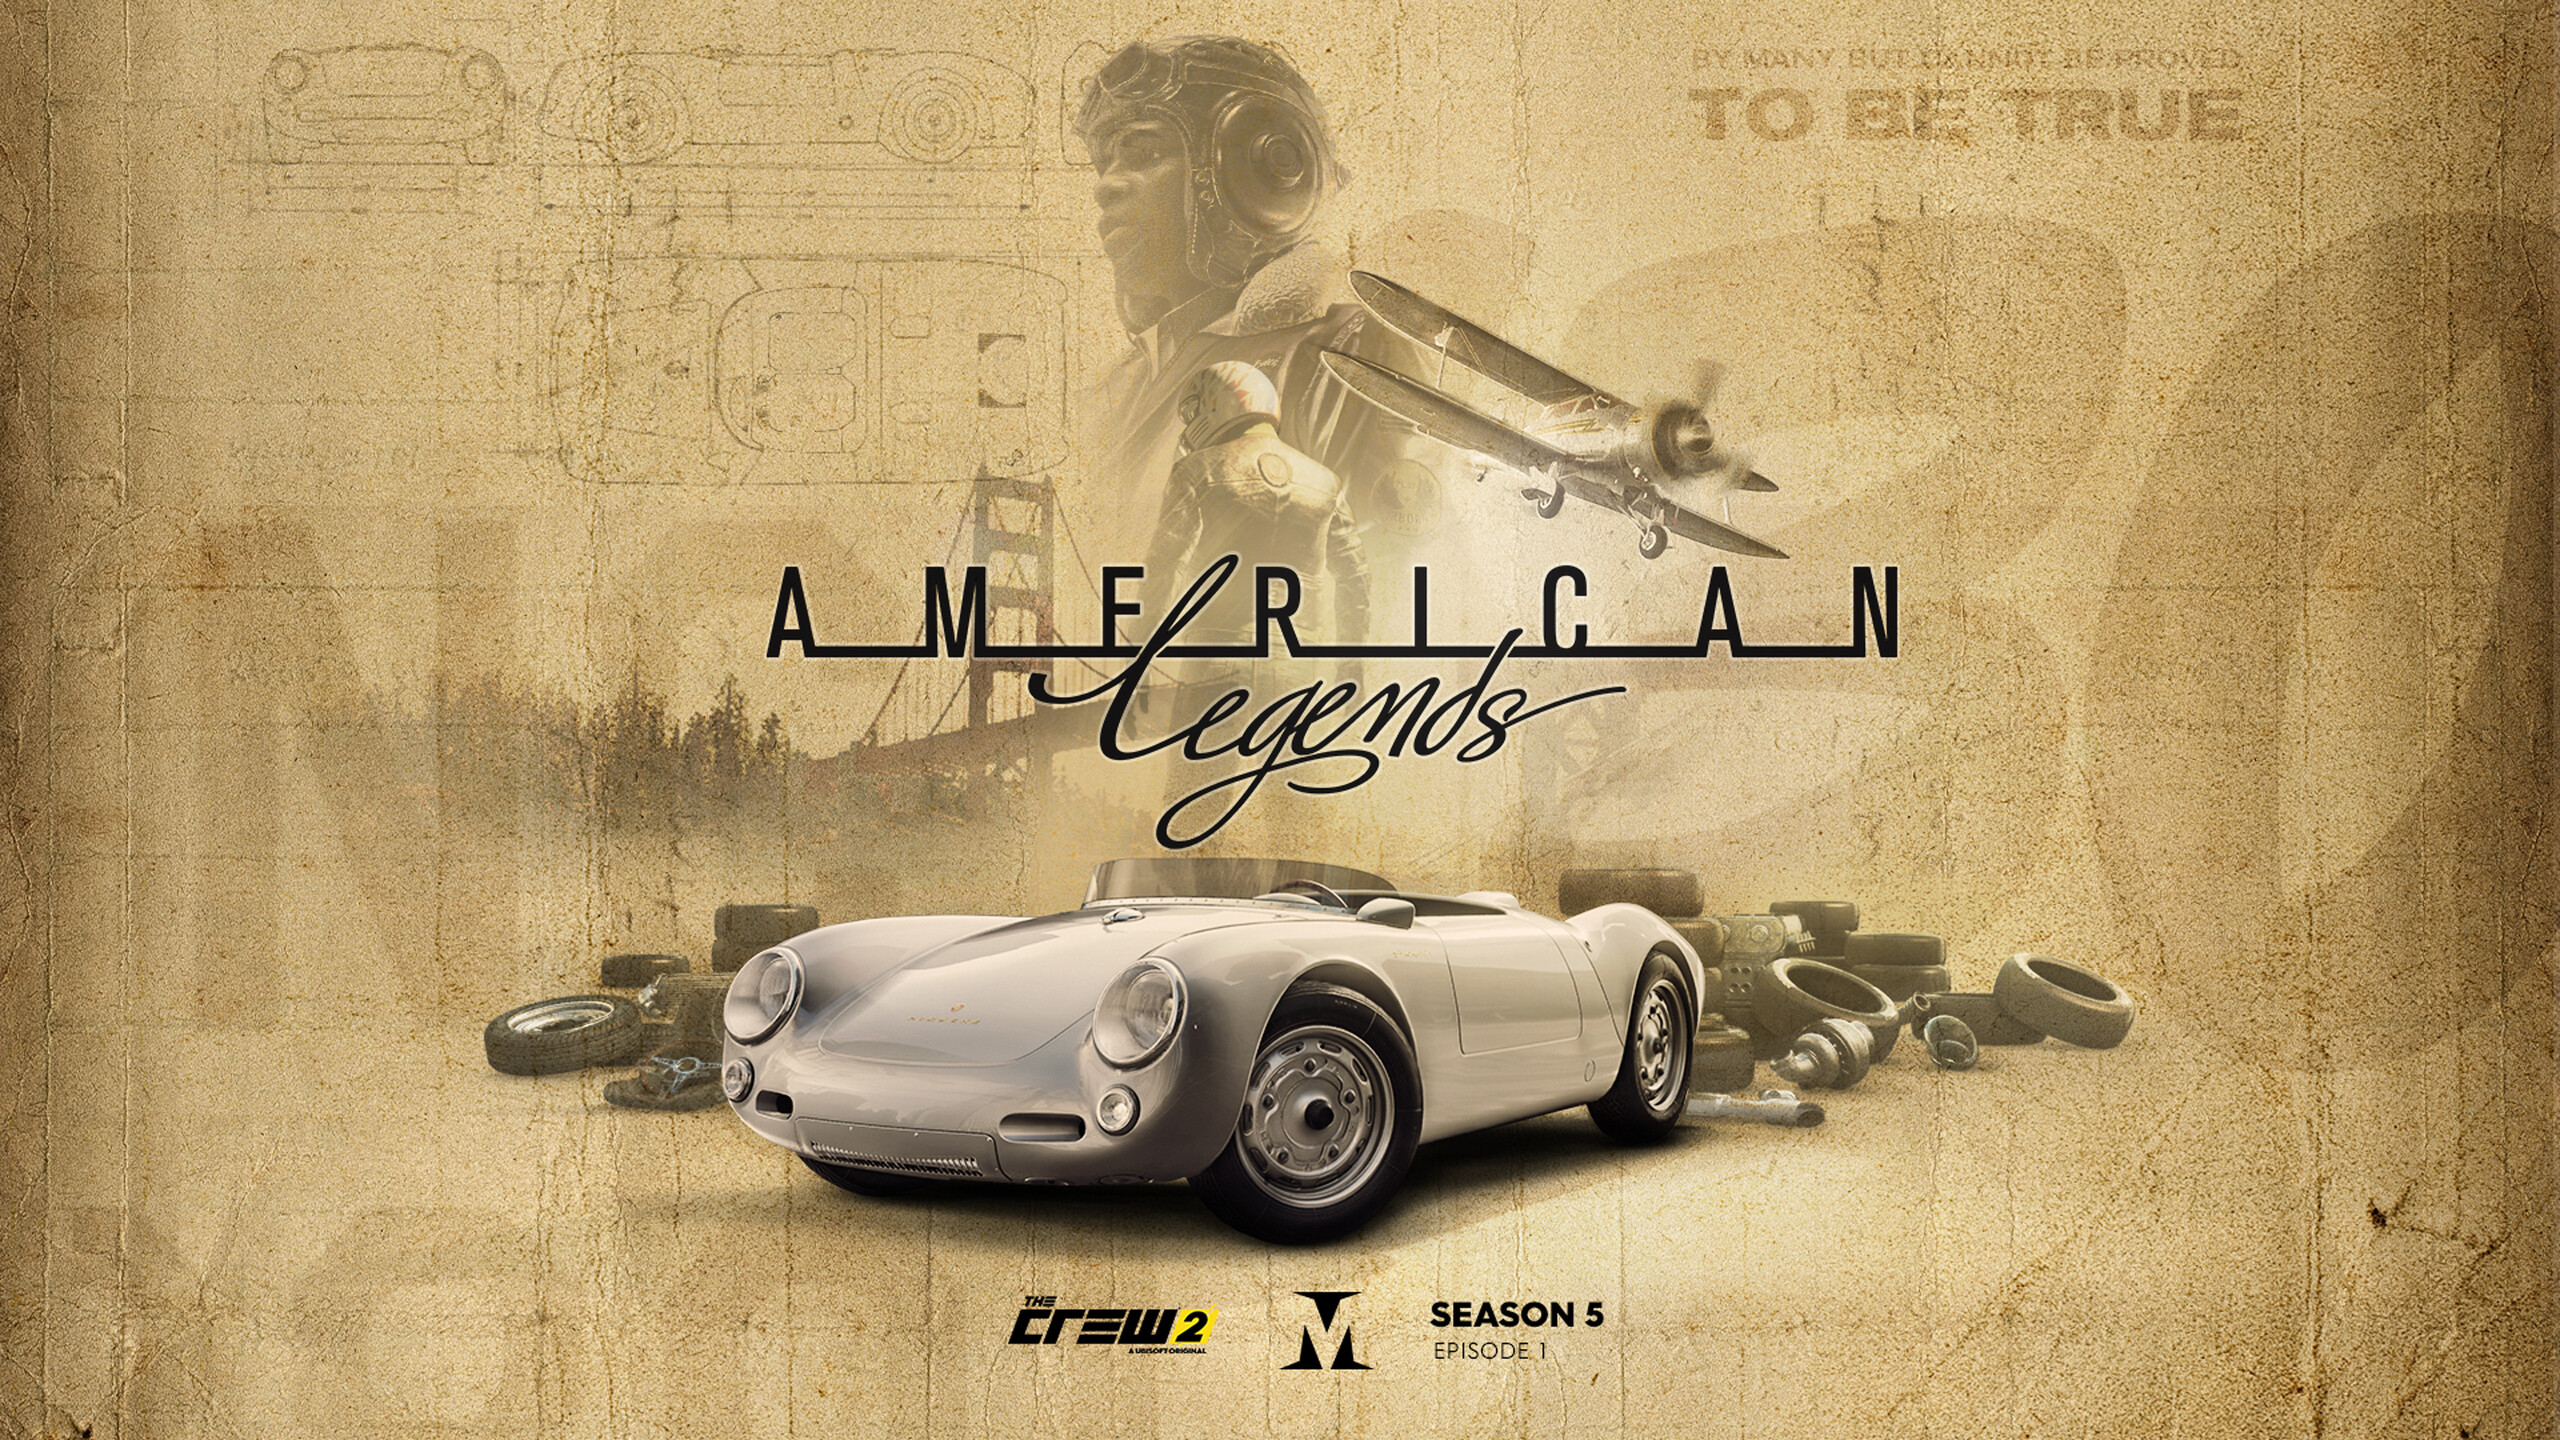 American Legends, THE CREW Wiki